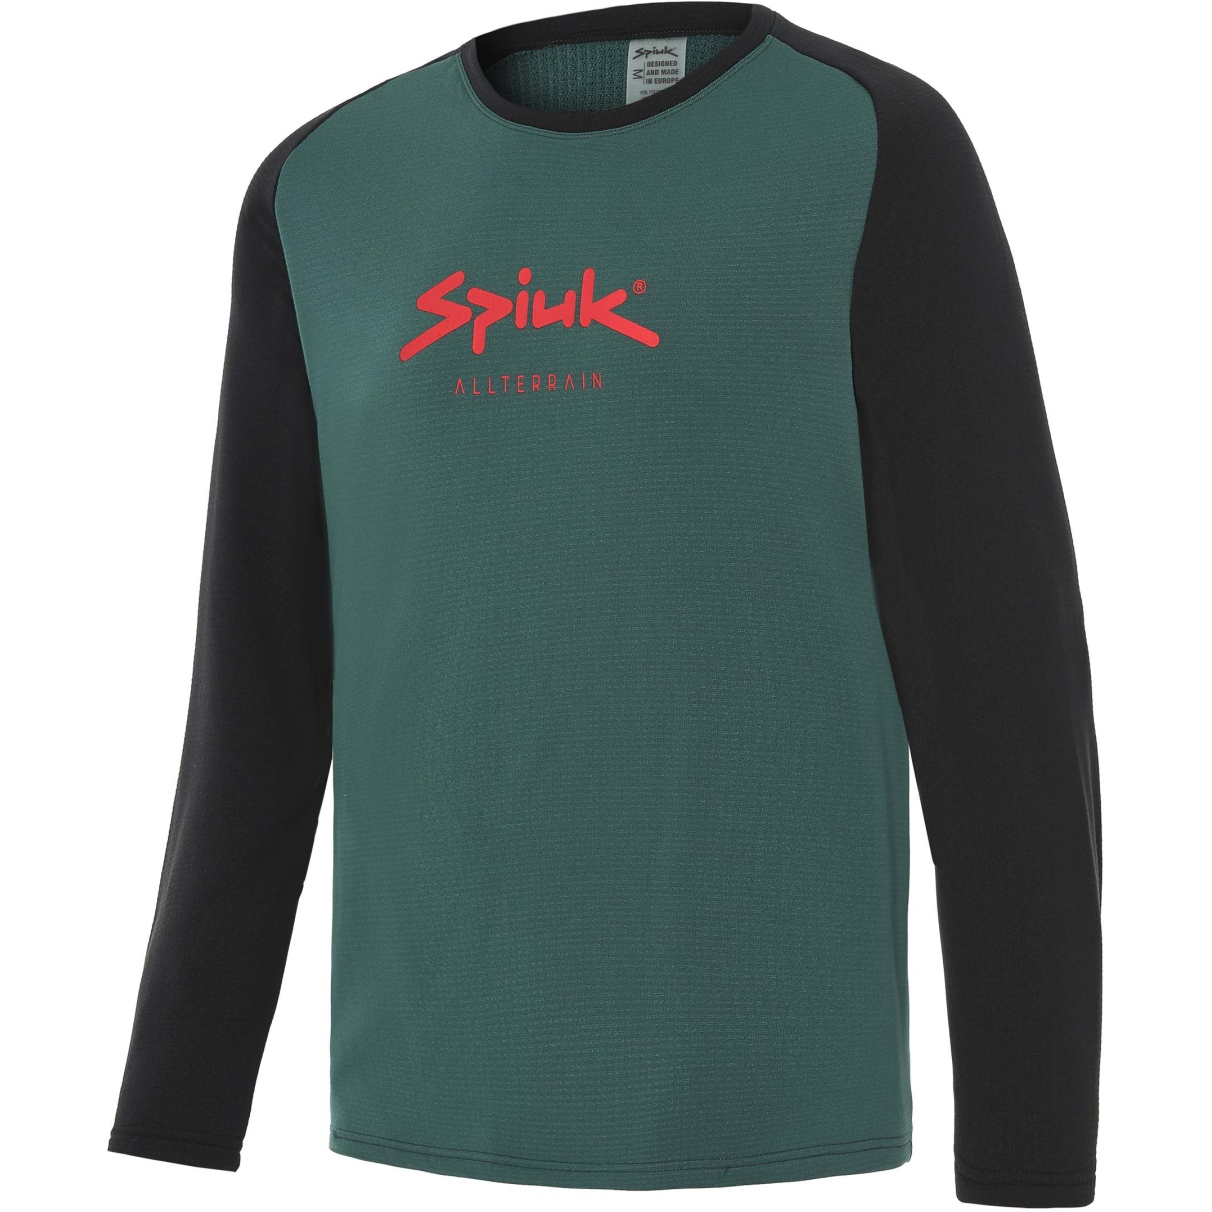 Picture of Spiuk ALL TERRAIN Long Sleeve Jersey Men - green